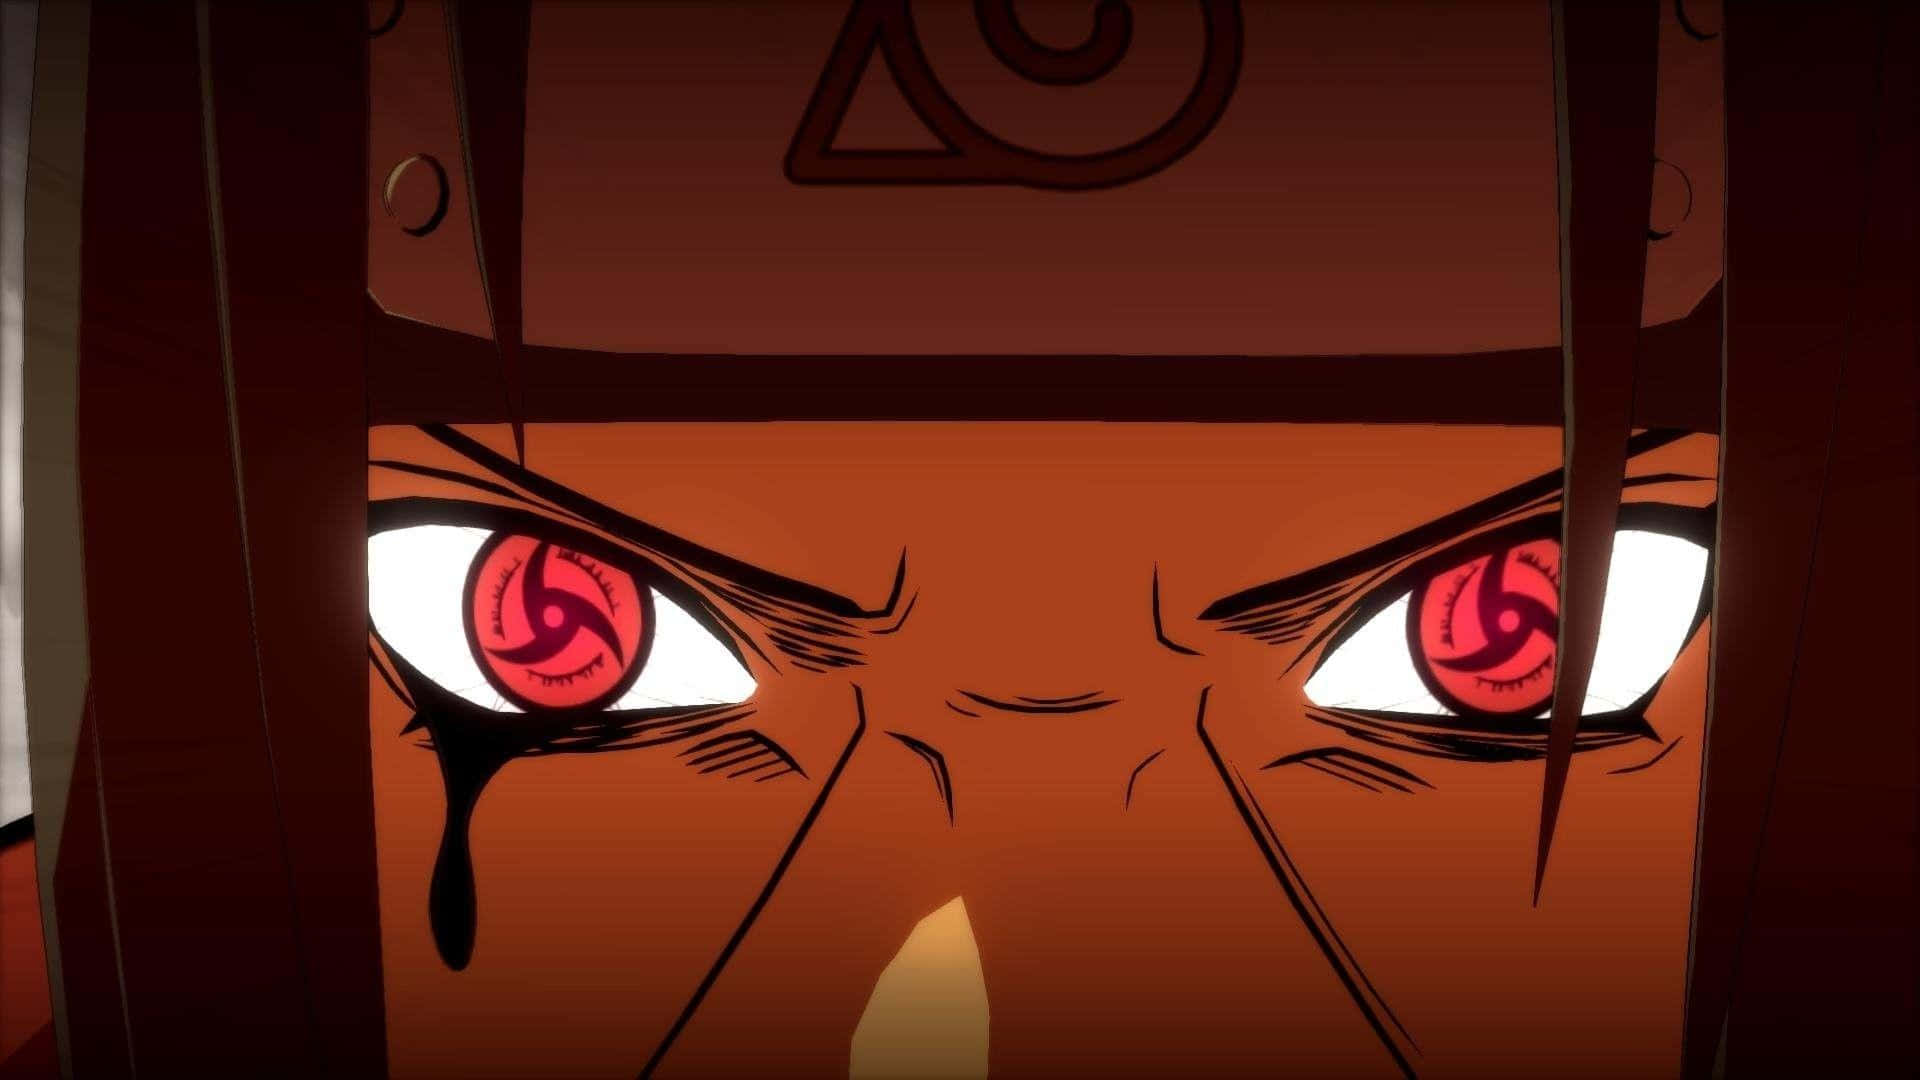 From Strength to Strength - Itachi Face Wallpaper